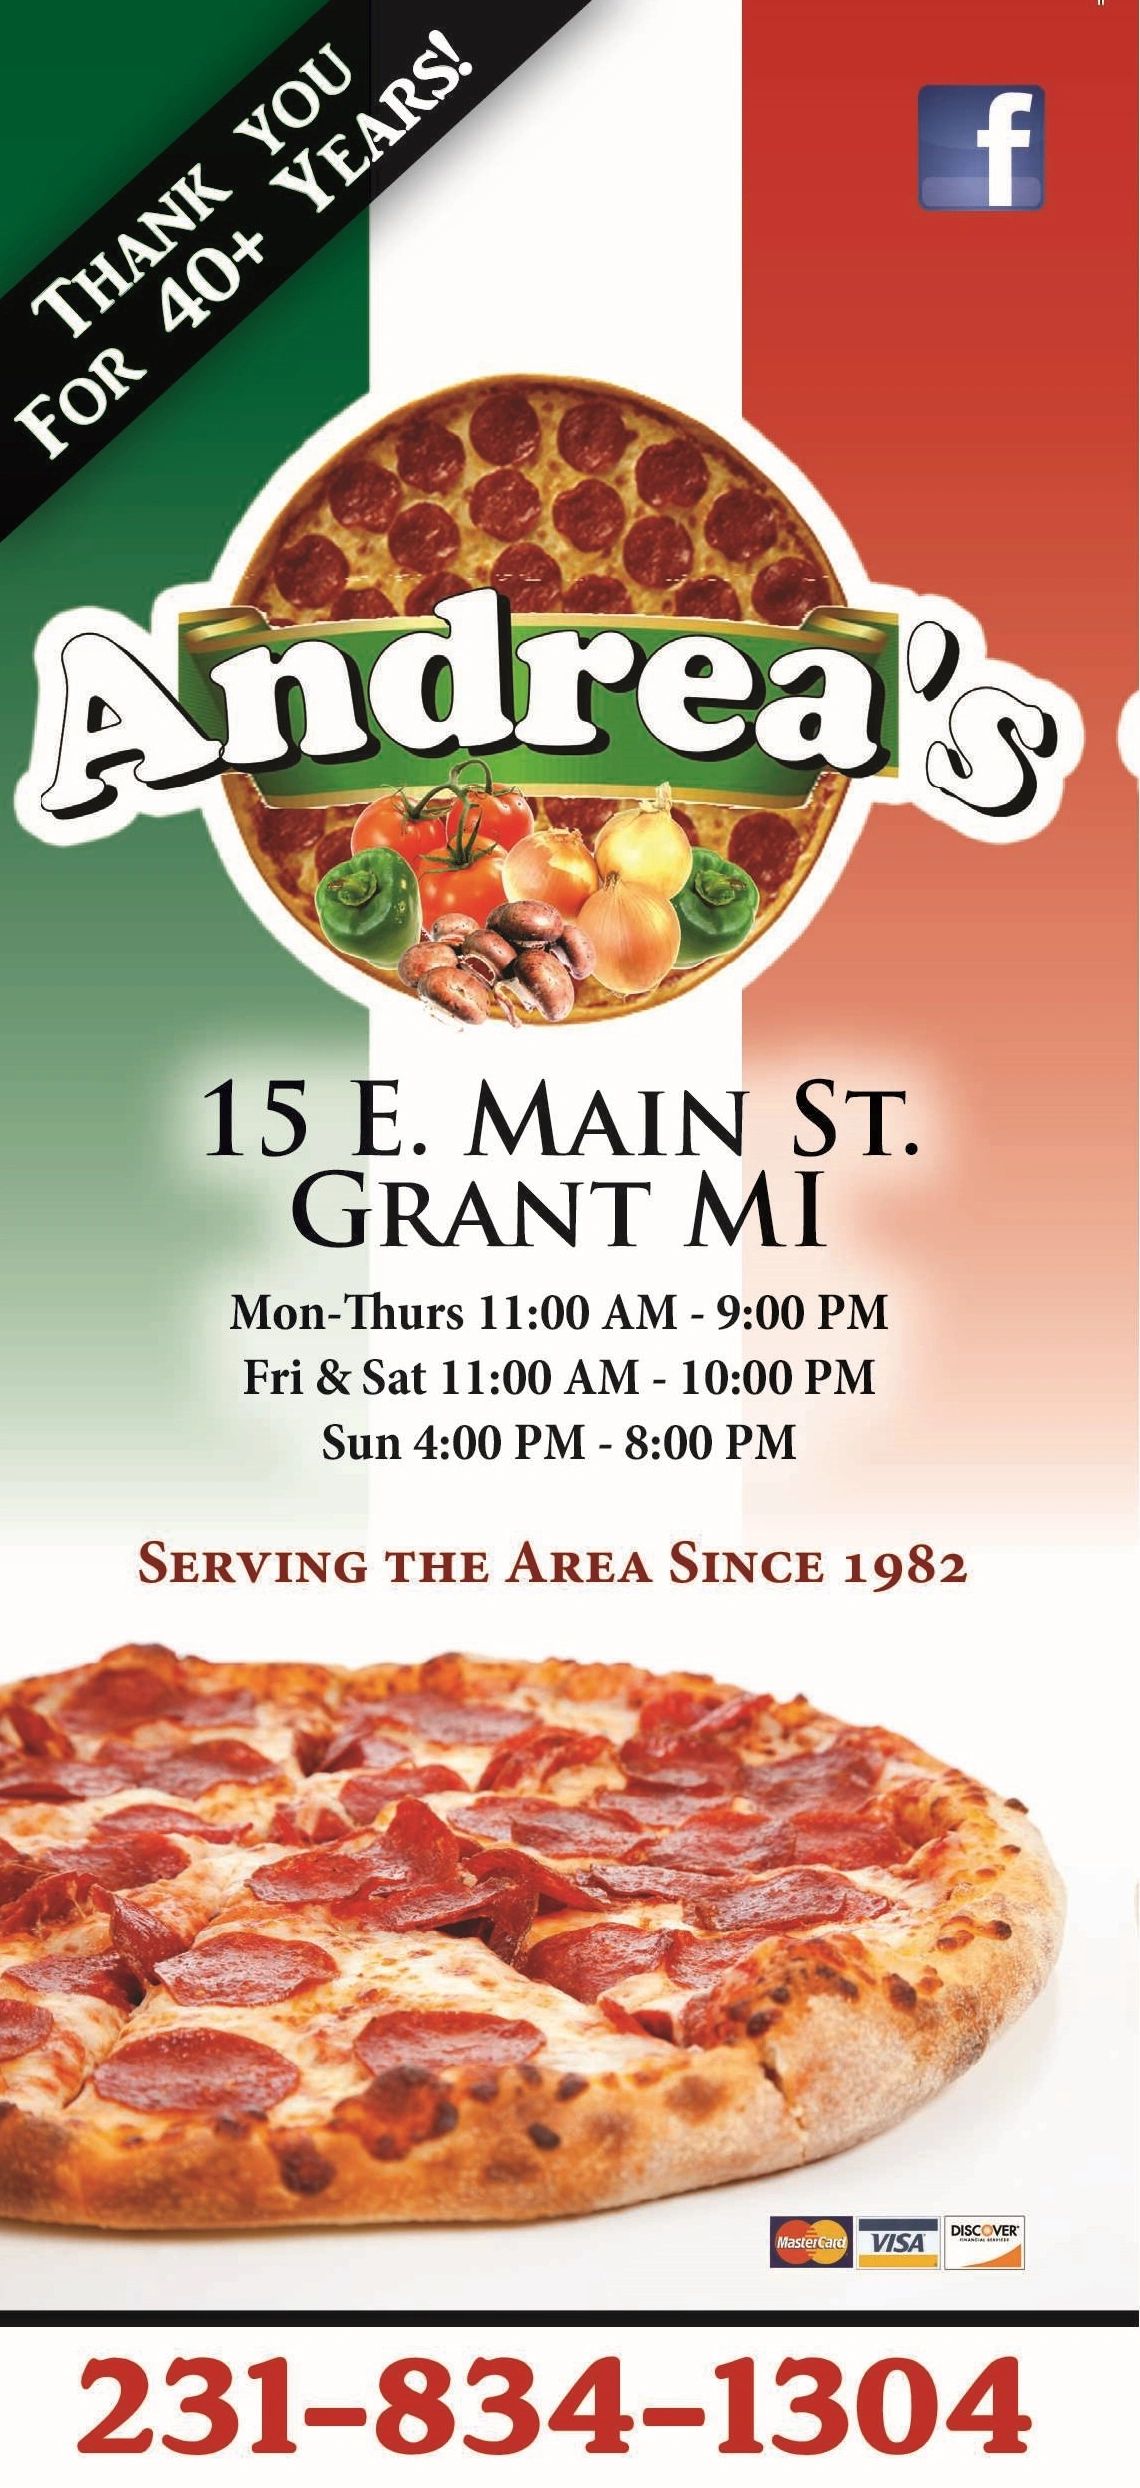 Andreas Pizza's menu with logo, address, hours and location